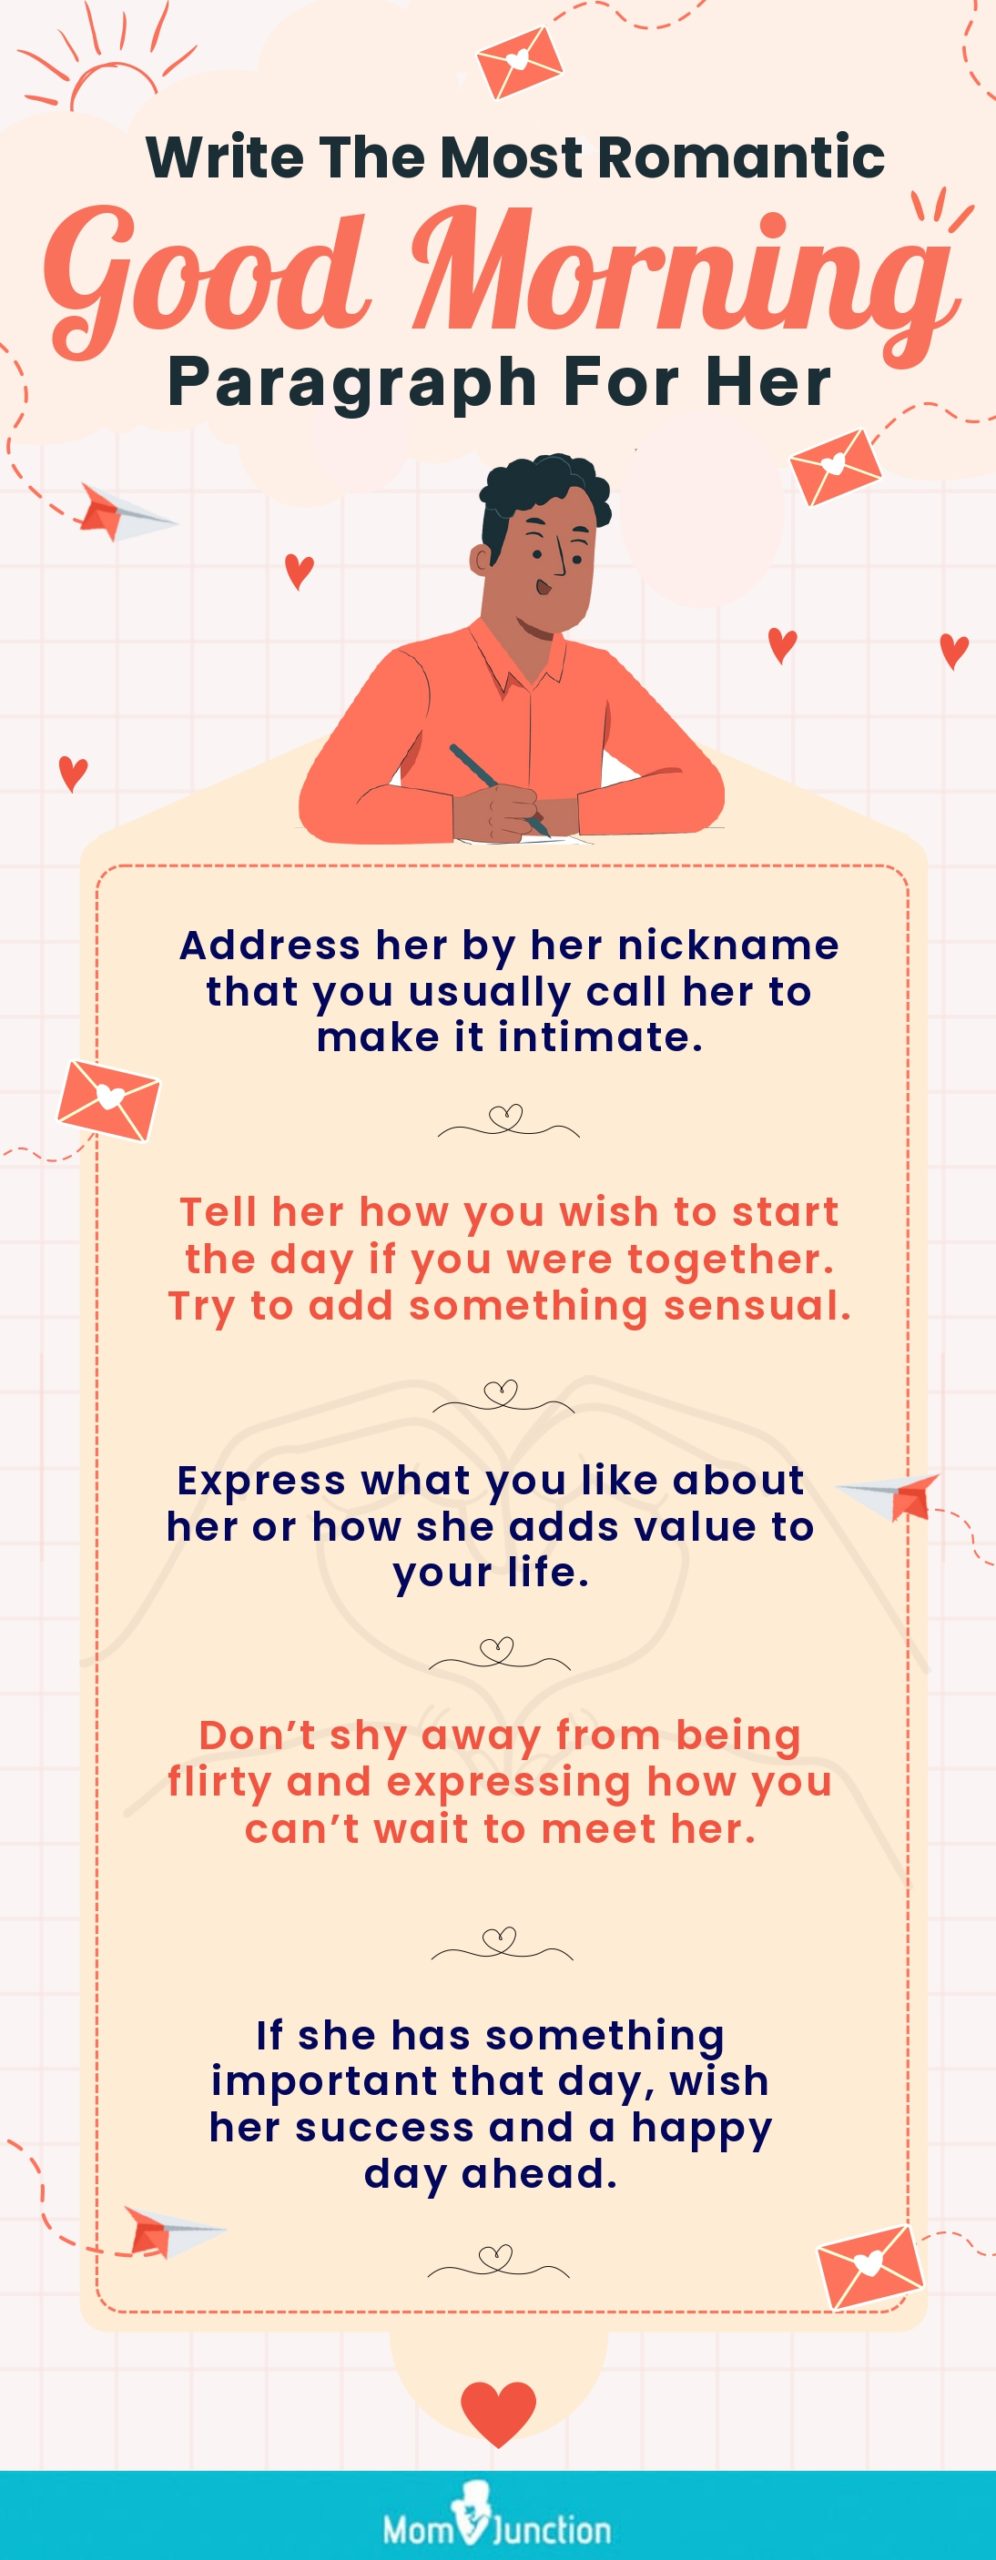 good morning paragraph for her [infographic]